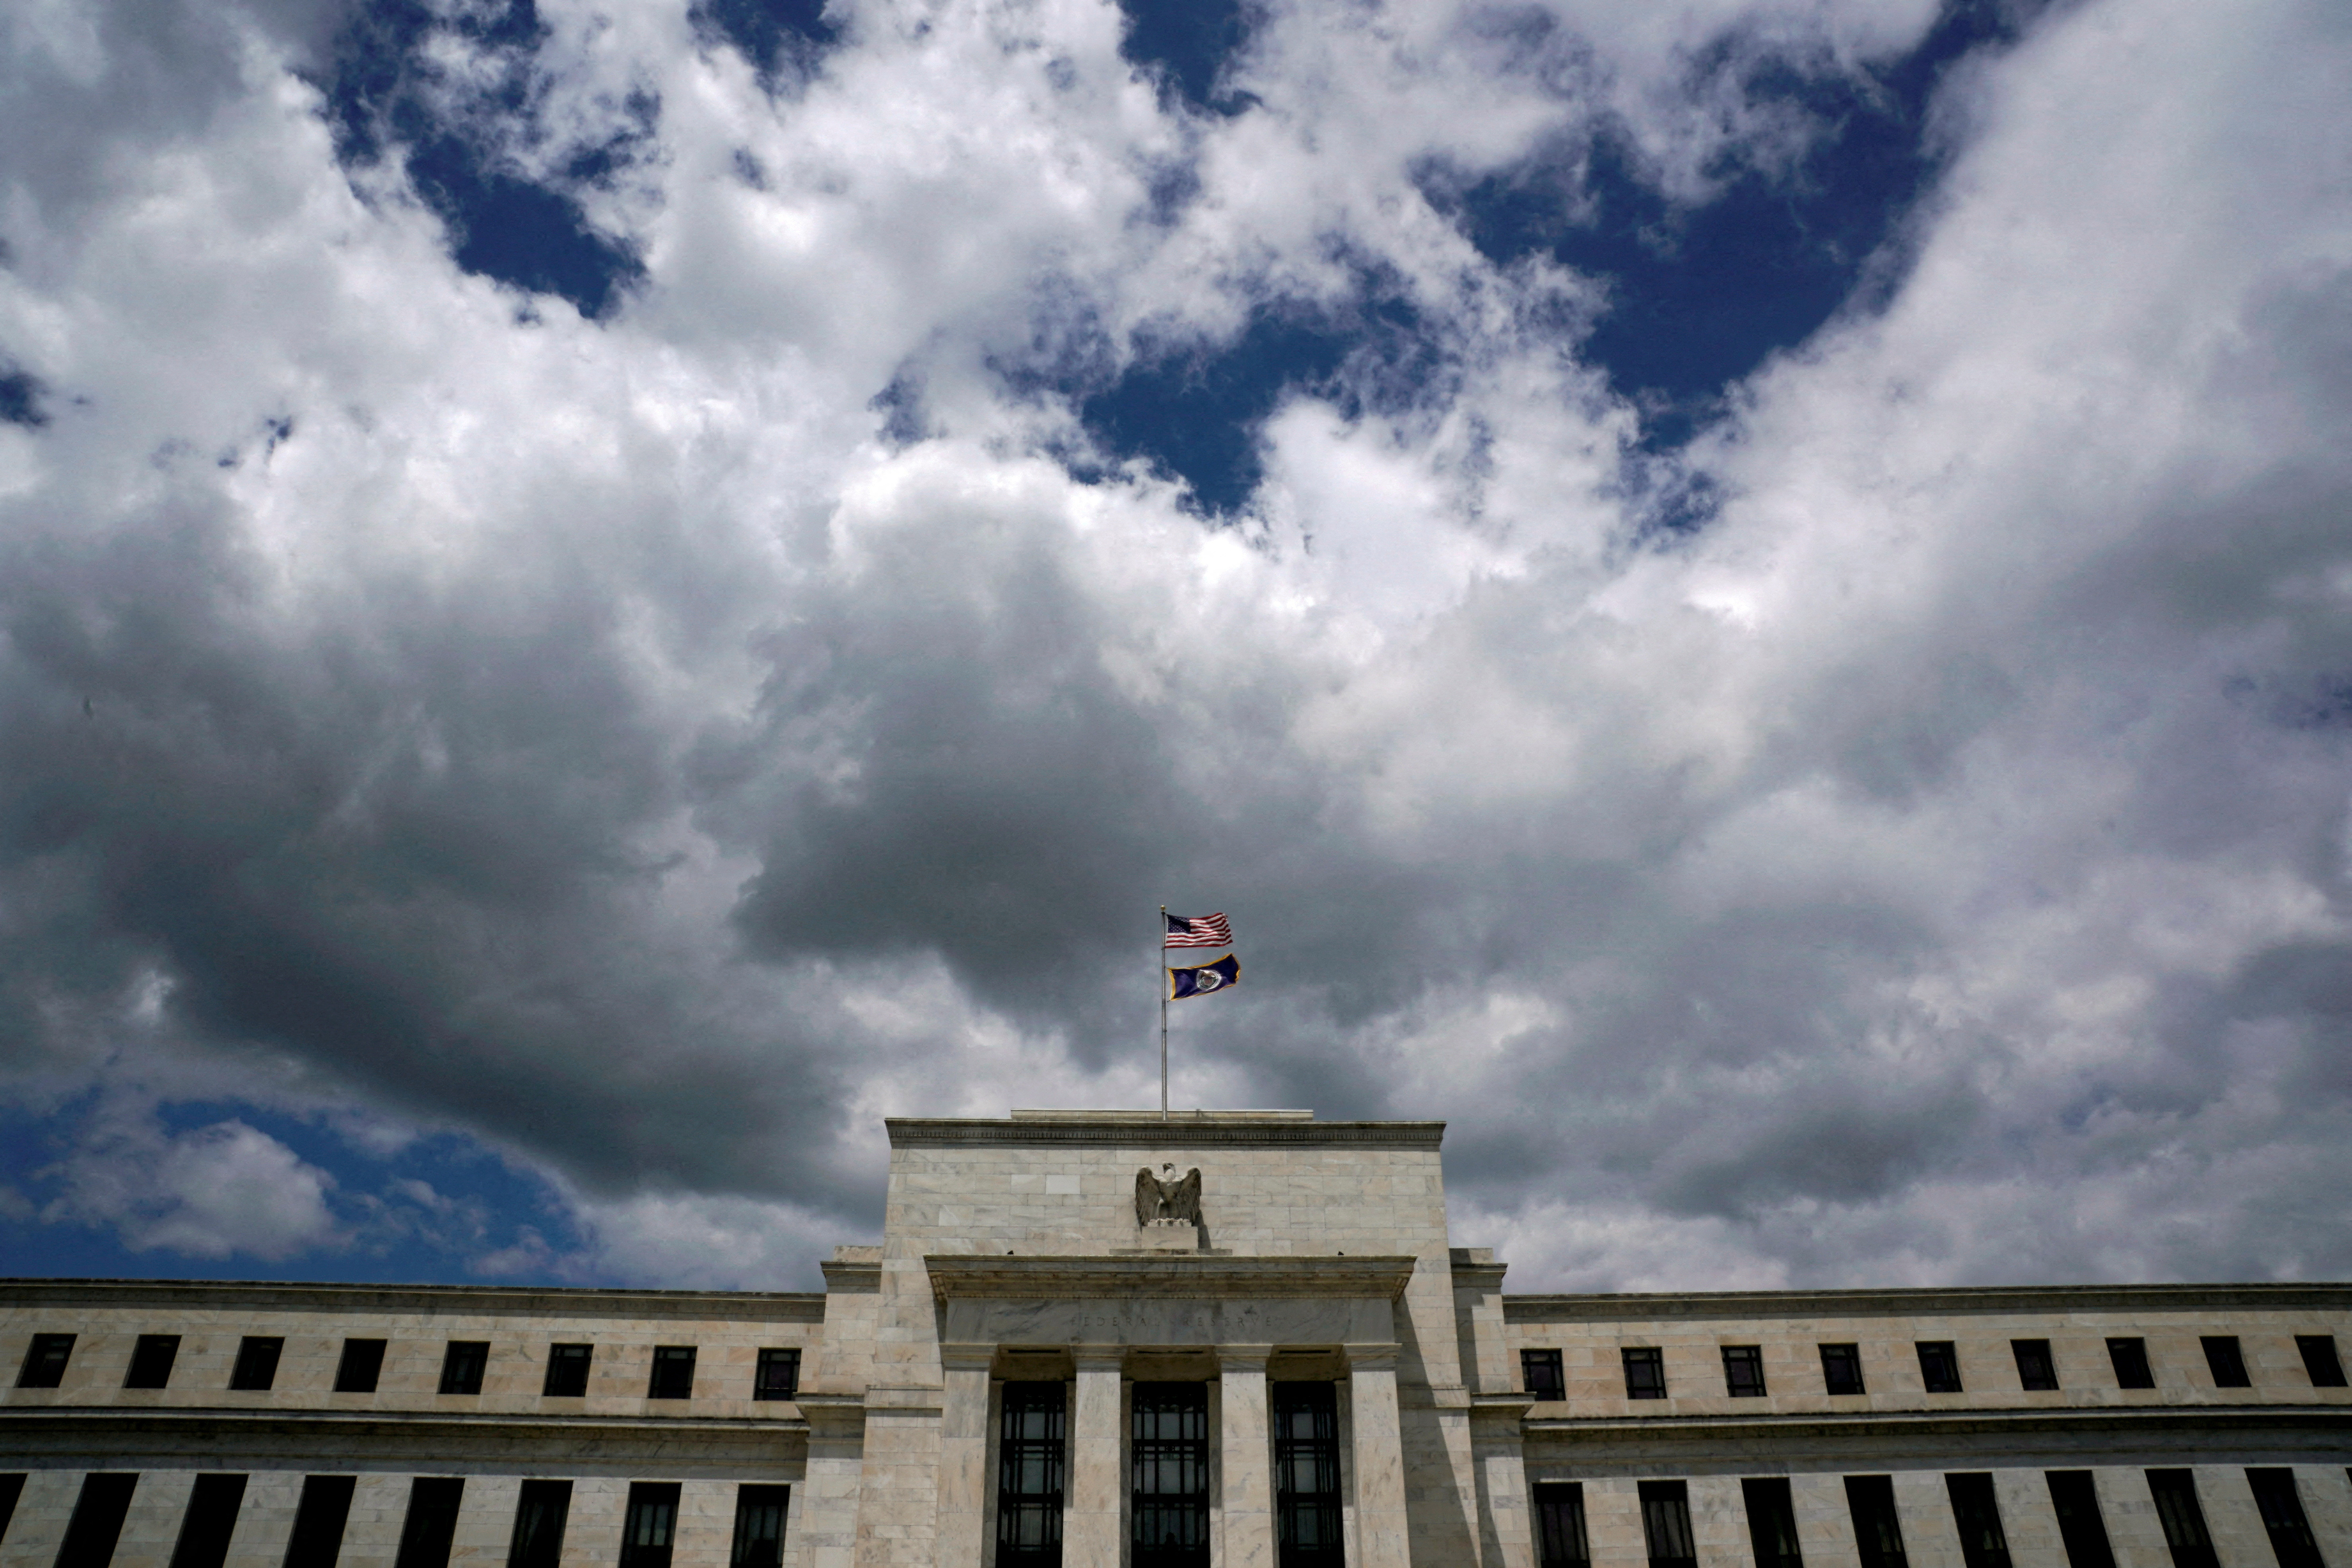 louds over the Federal Reserve in Washington